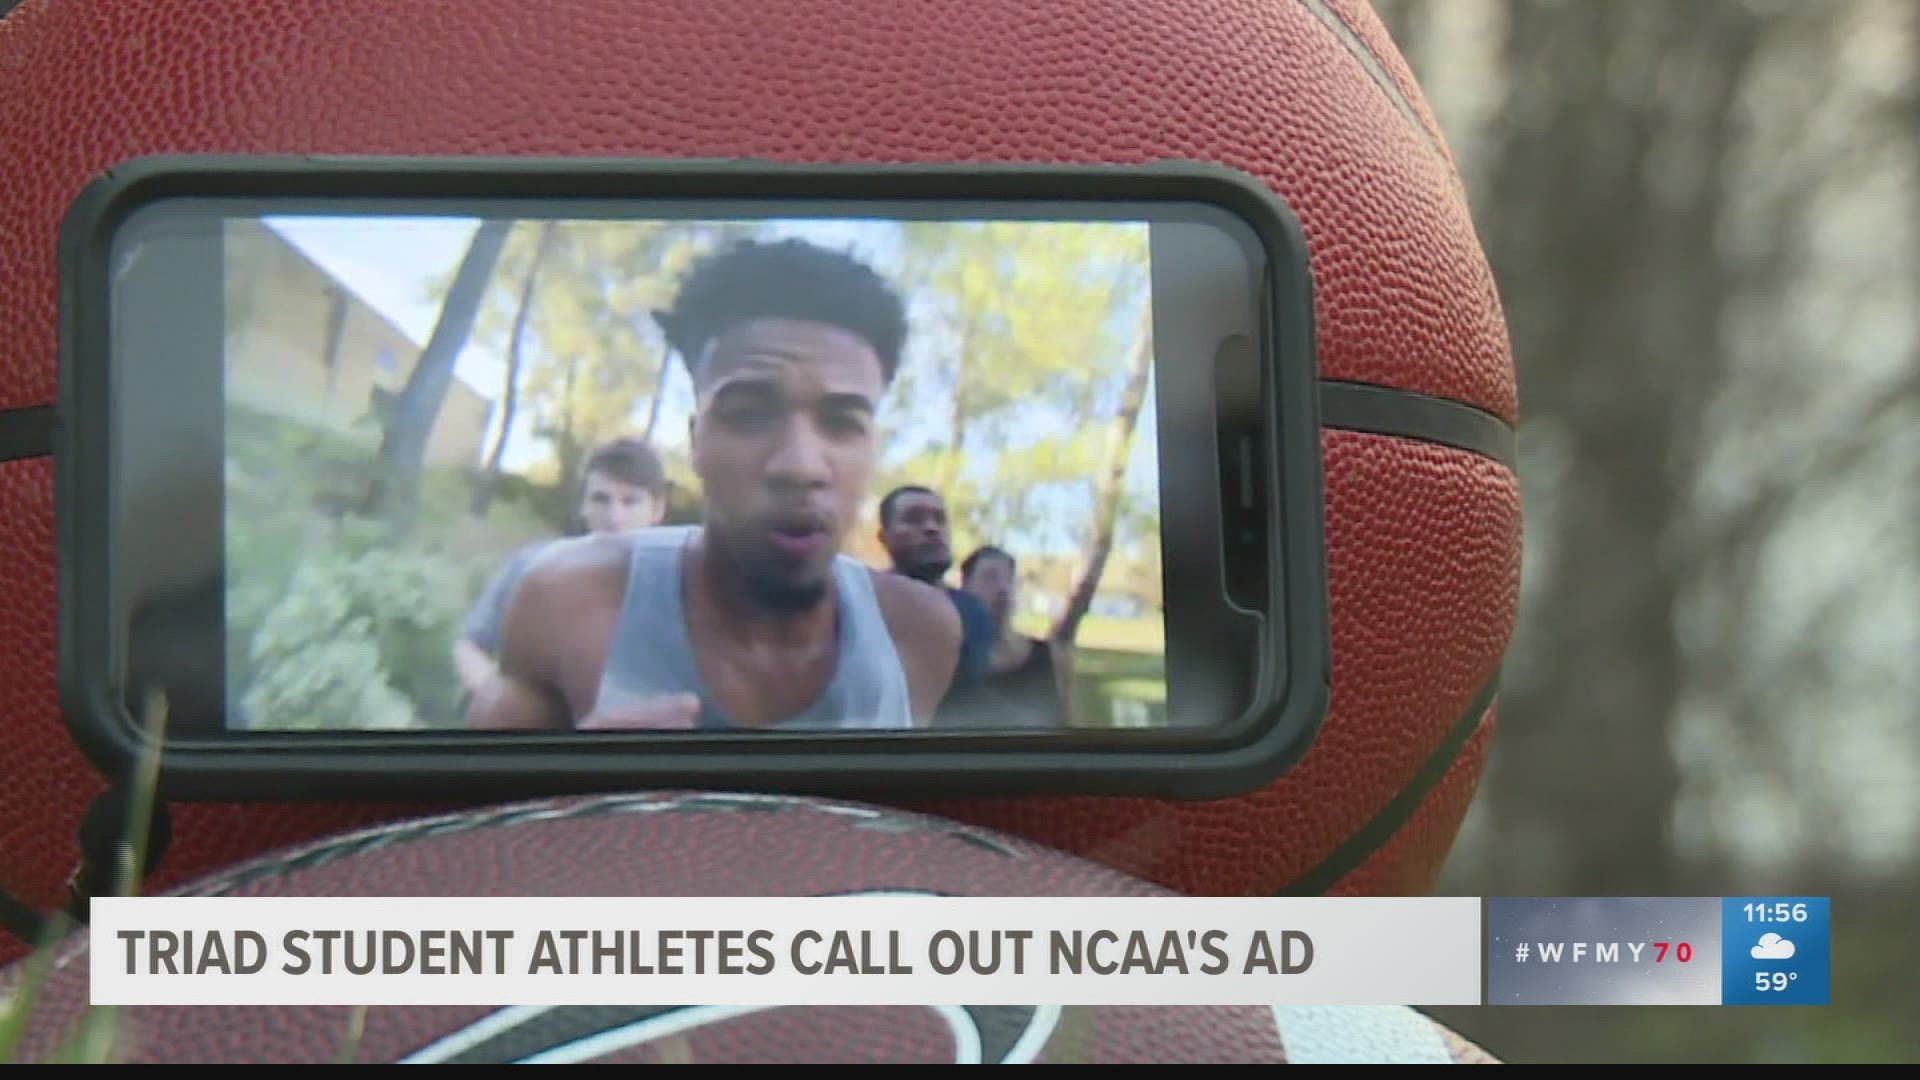 A former North Carolina A&T football player and basketball player say the NCAA ad doesn't show the true dedication it takes to compete in college.